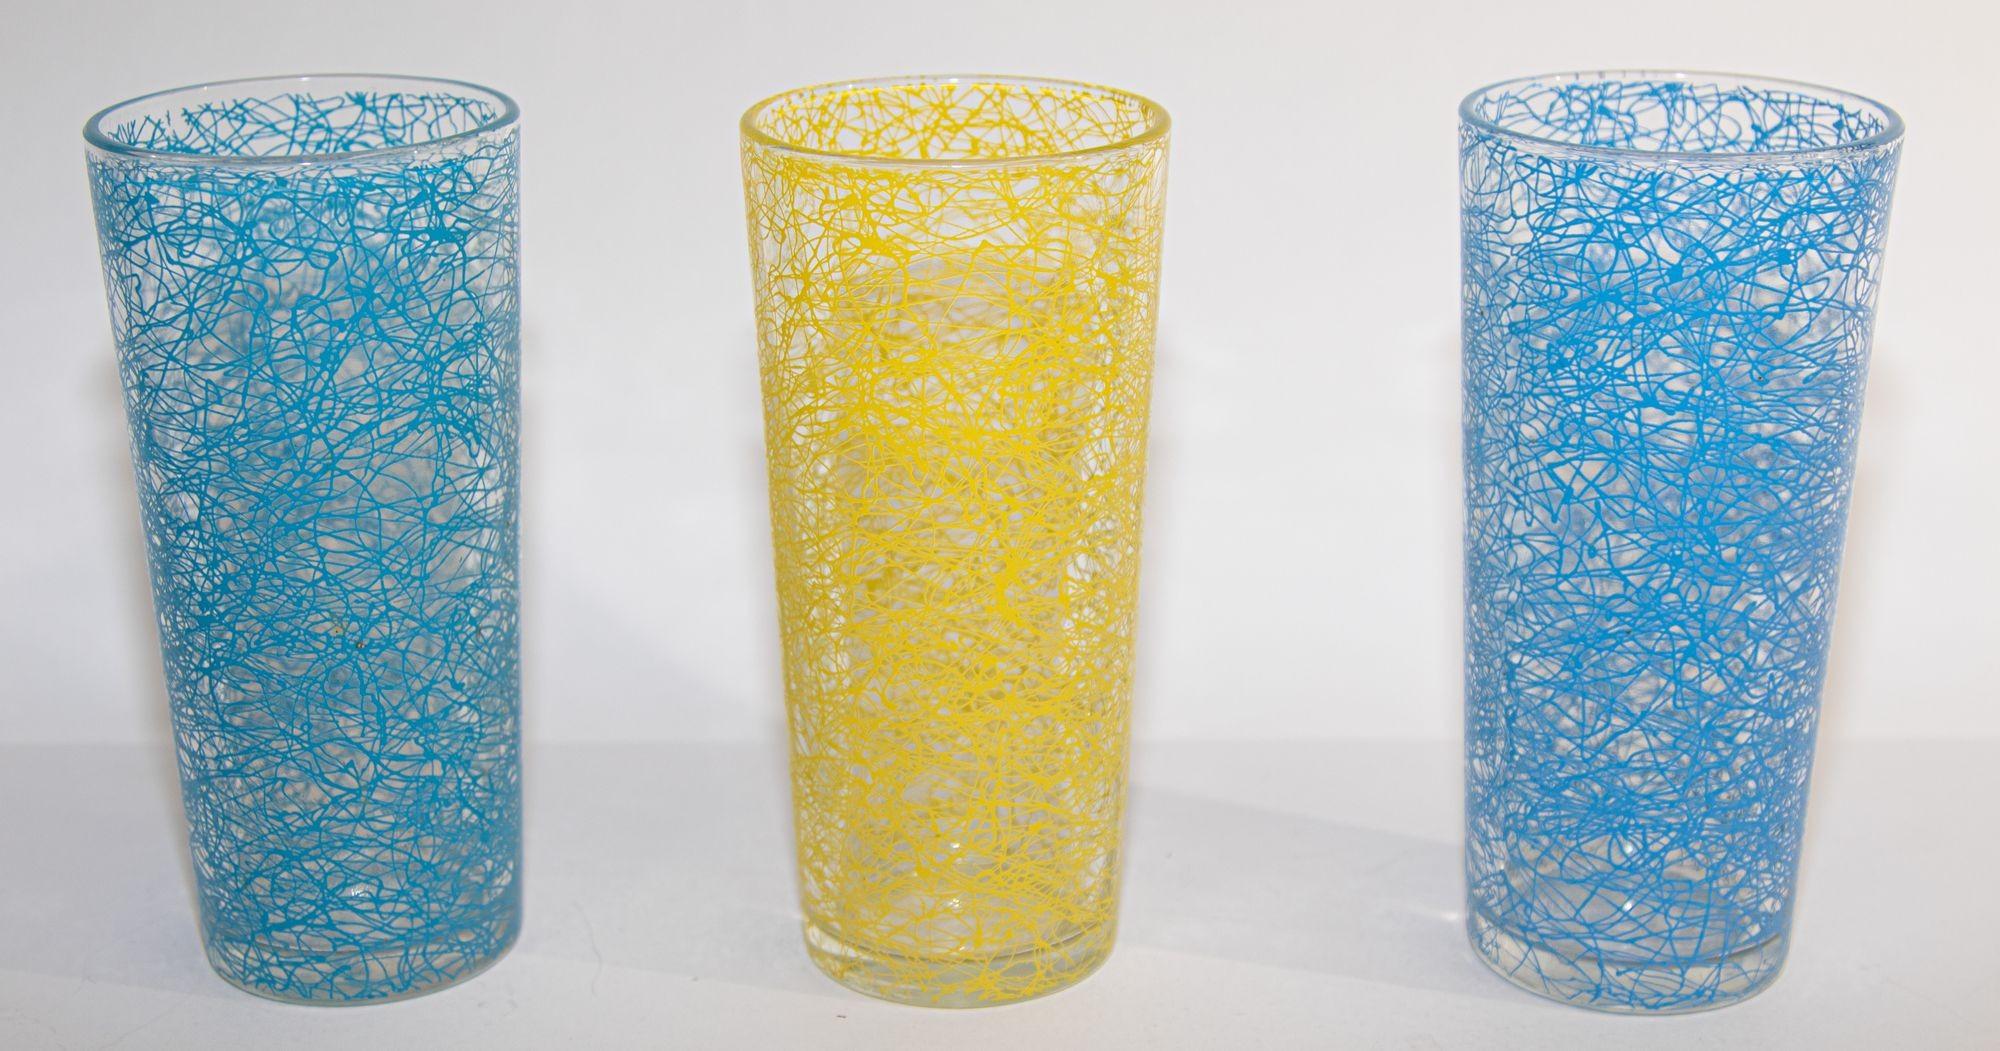 Set of three vintage collectible retro spaghetti string tumblers.
Set includes 3 highball vintage yellow gold and powder blue spaghetti drizzle drinking glasses.
Fantastic midcentury set of 3, barware, glassware, midcentury, circa